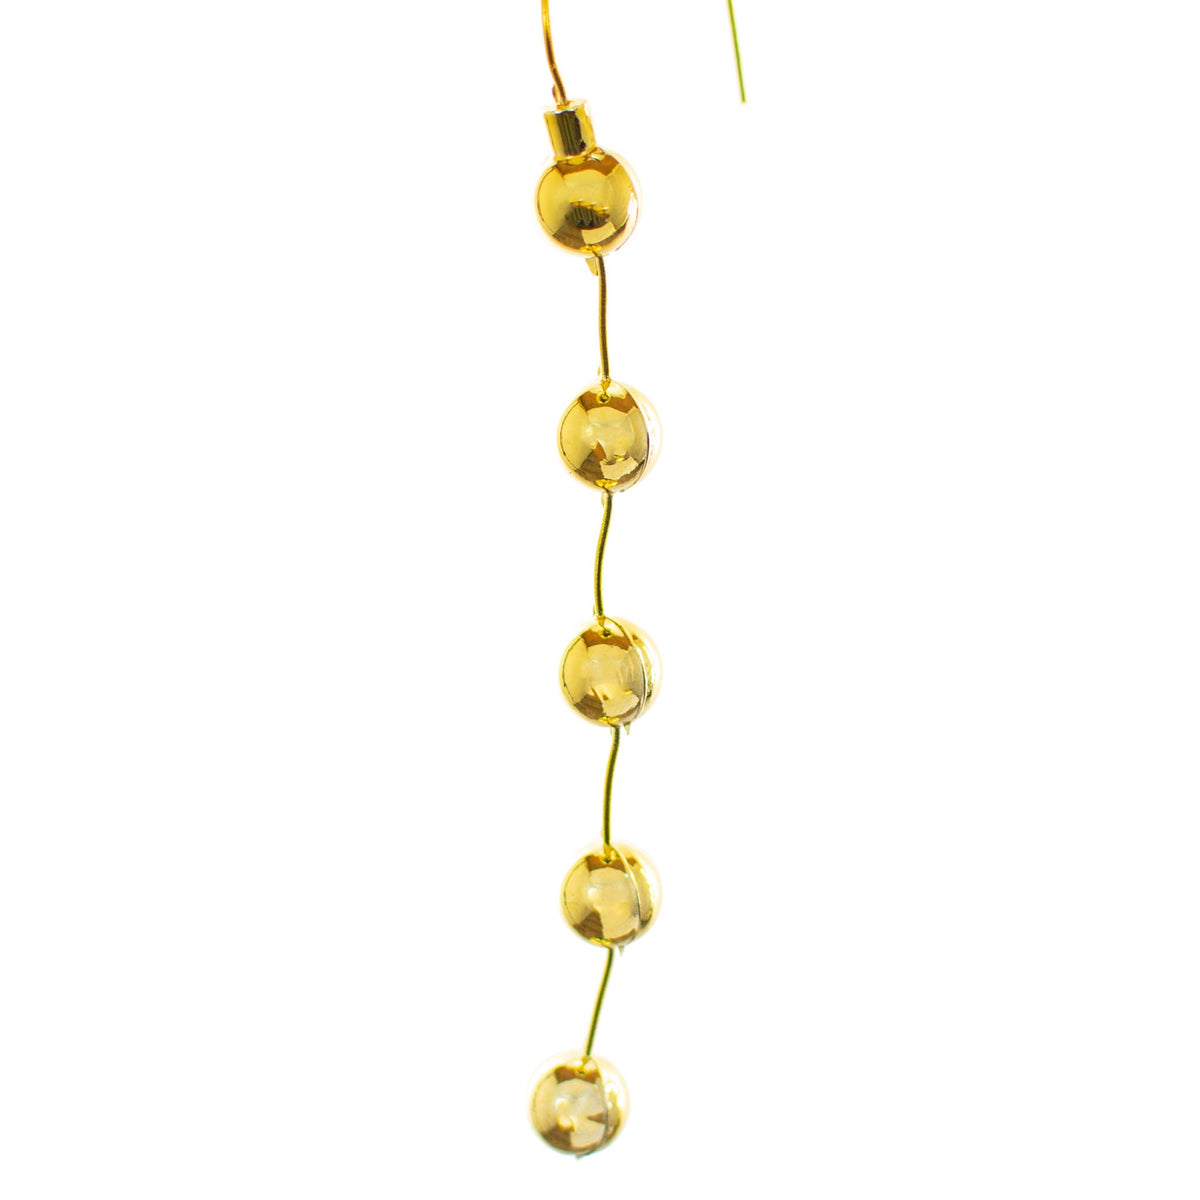 Gold Berry Pick Stem Branches